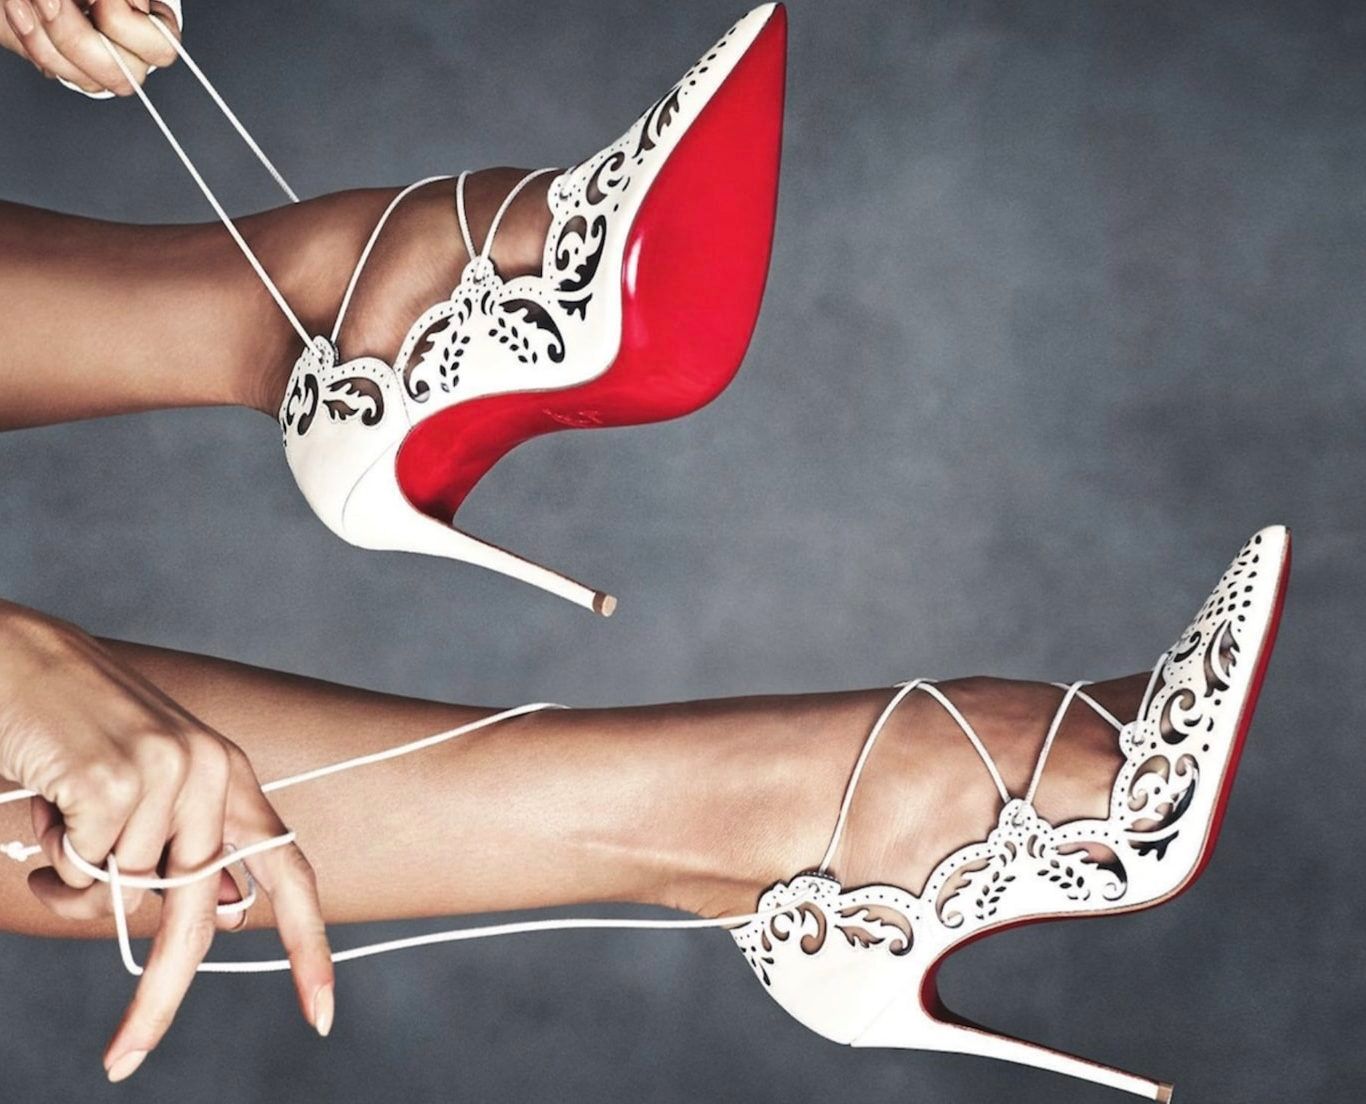 En smule Møntvask rulletrappe Why is it expensive: The Christian Louboutin red soles